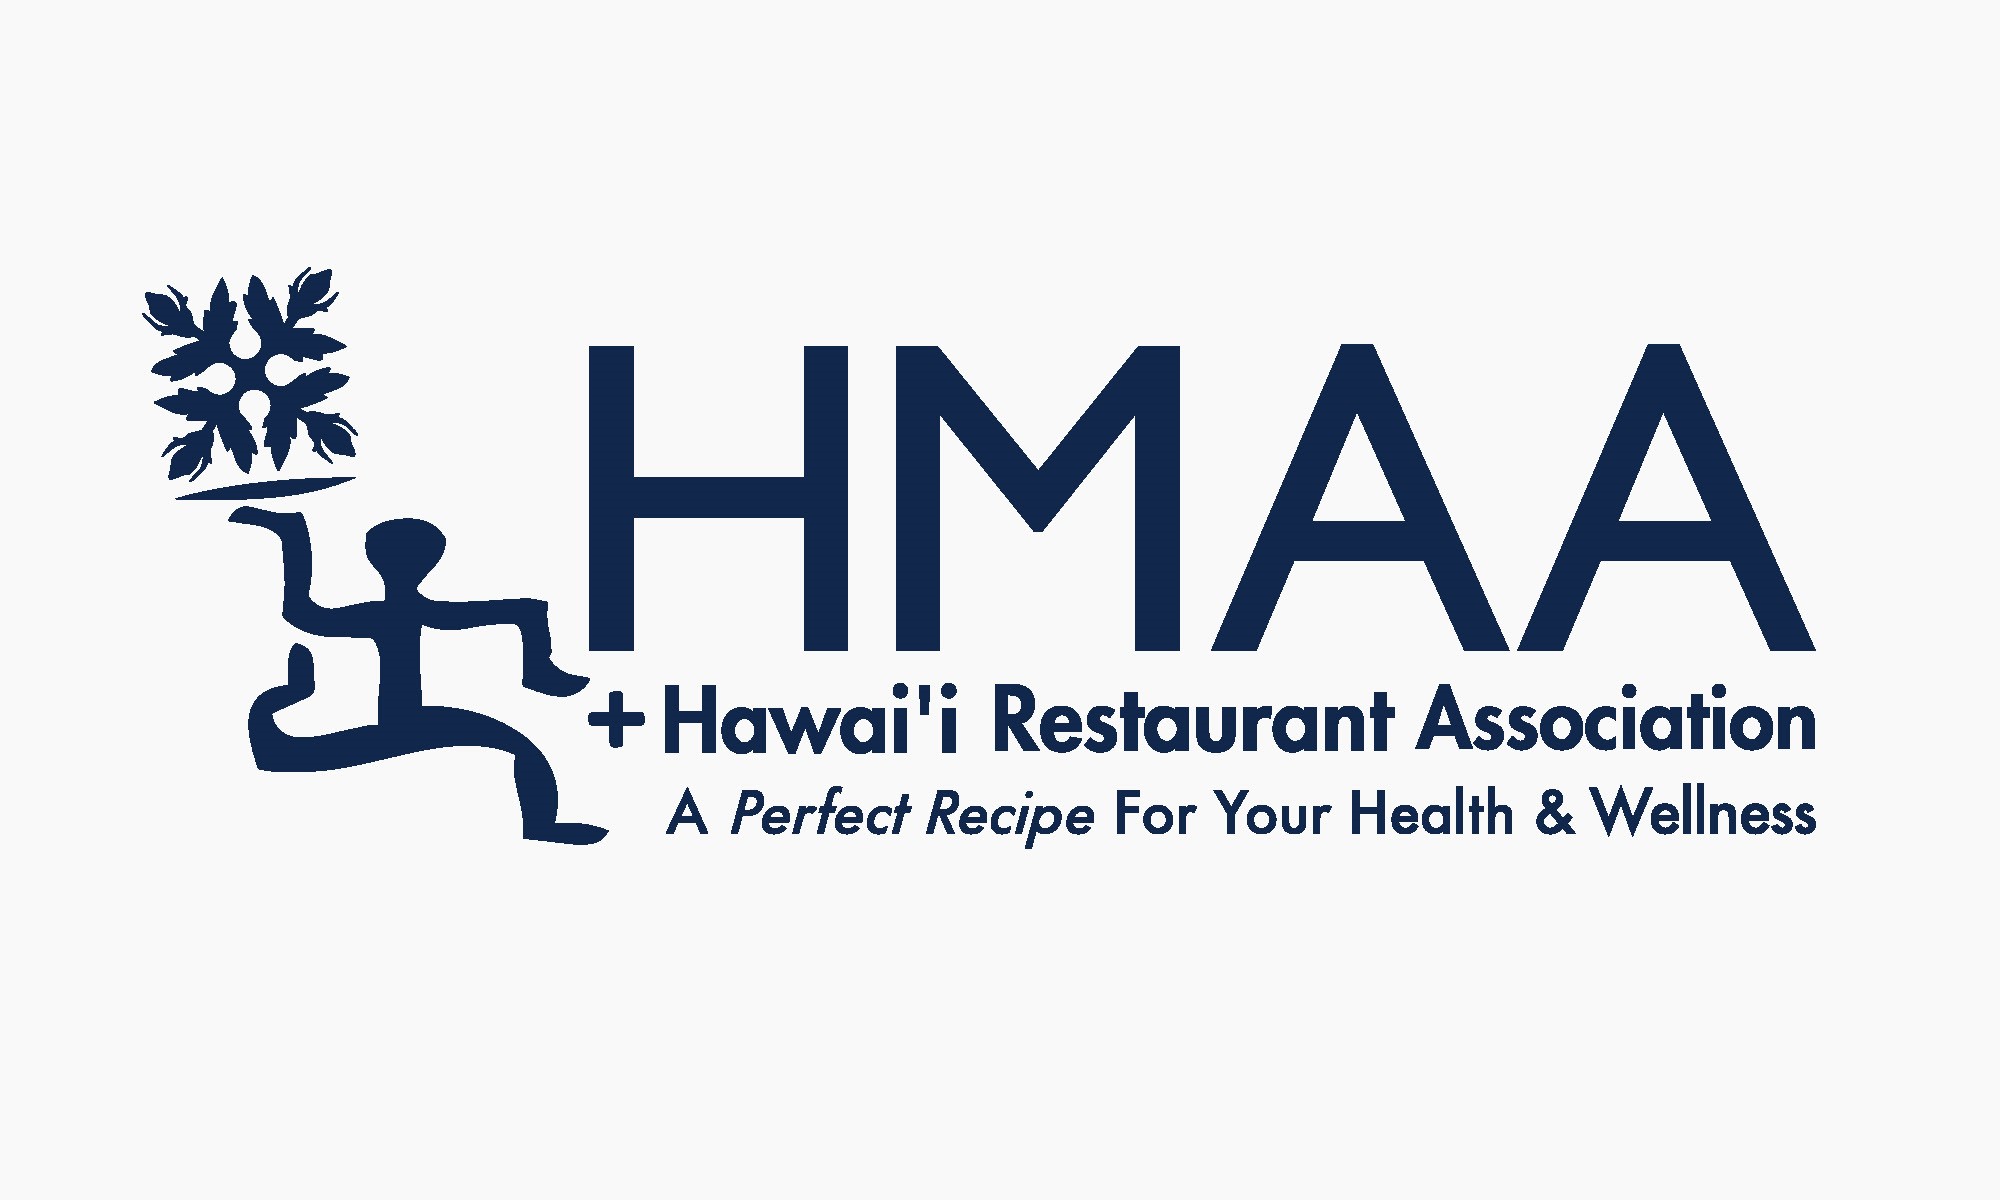 SKY Waikiki Saves by Switching to HMAA as it Reopens with a Fresh Concept